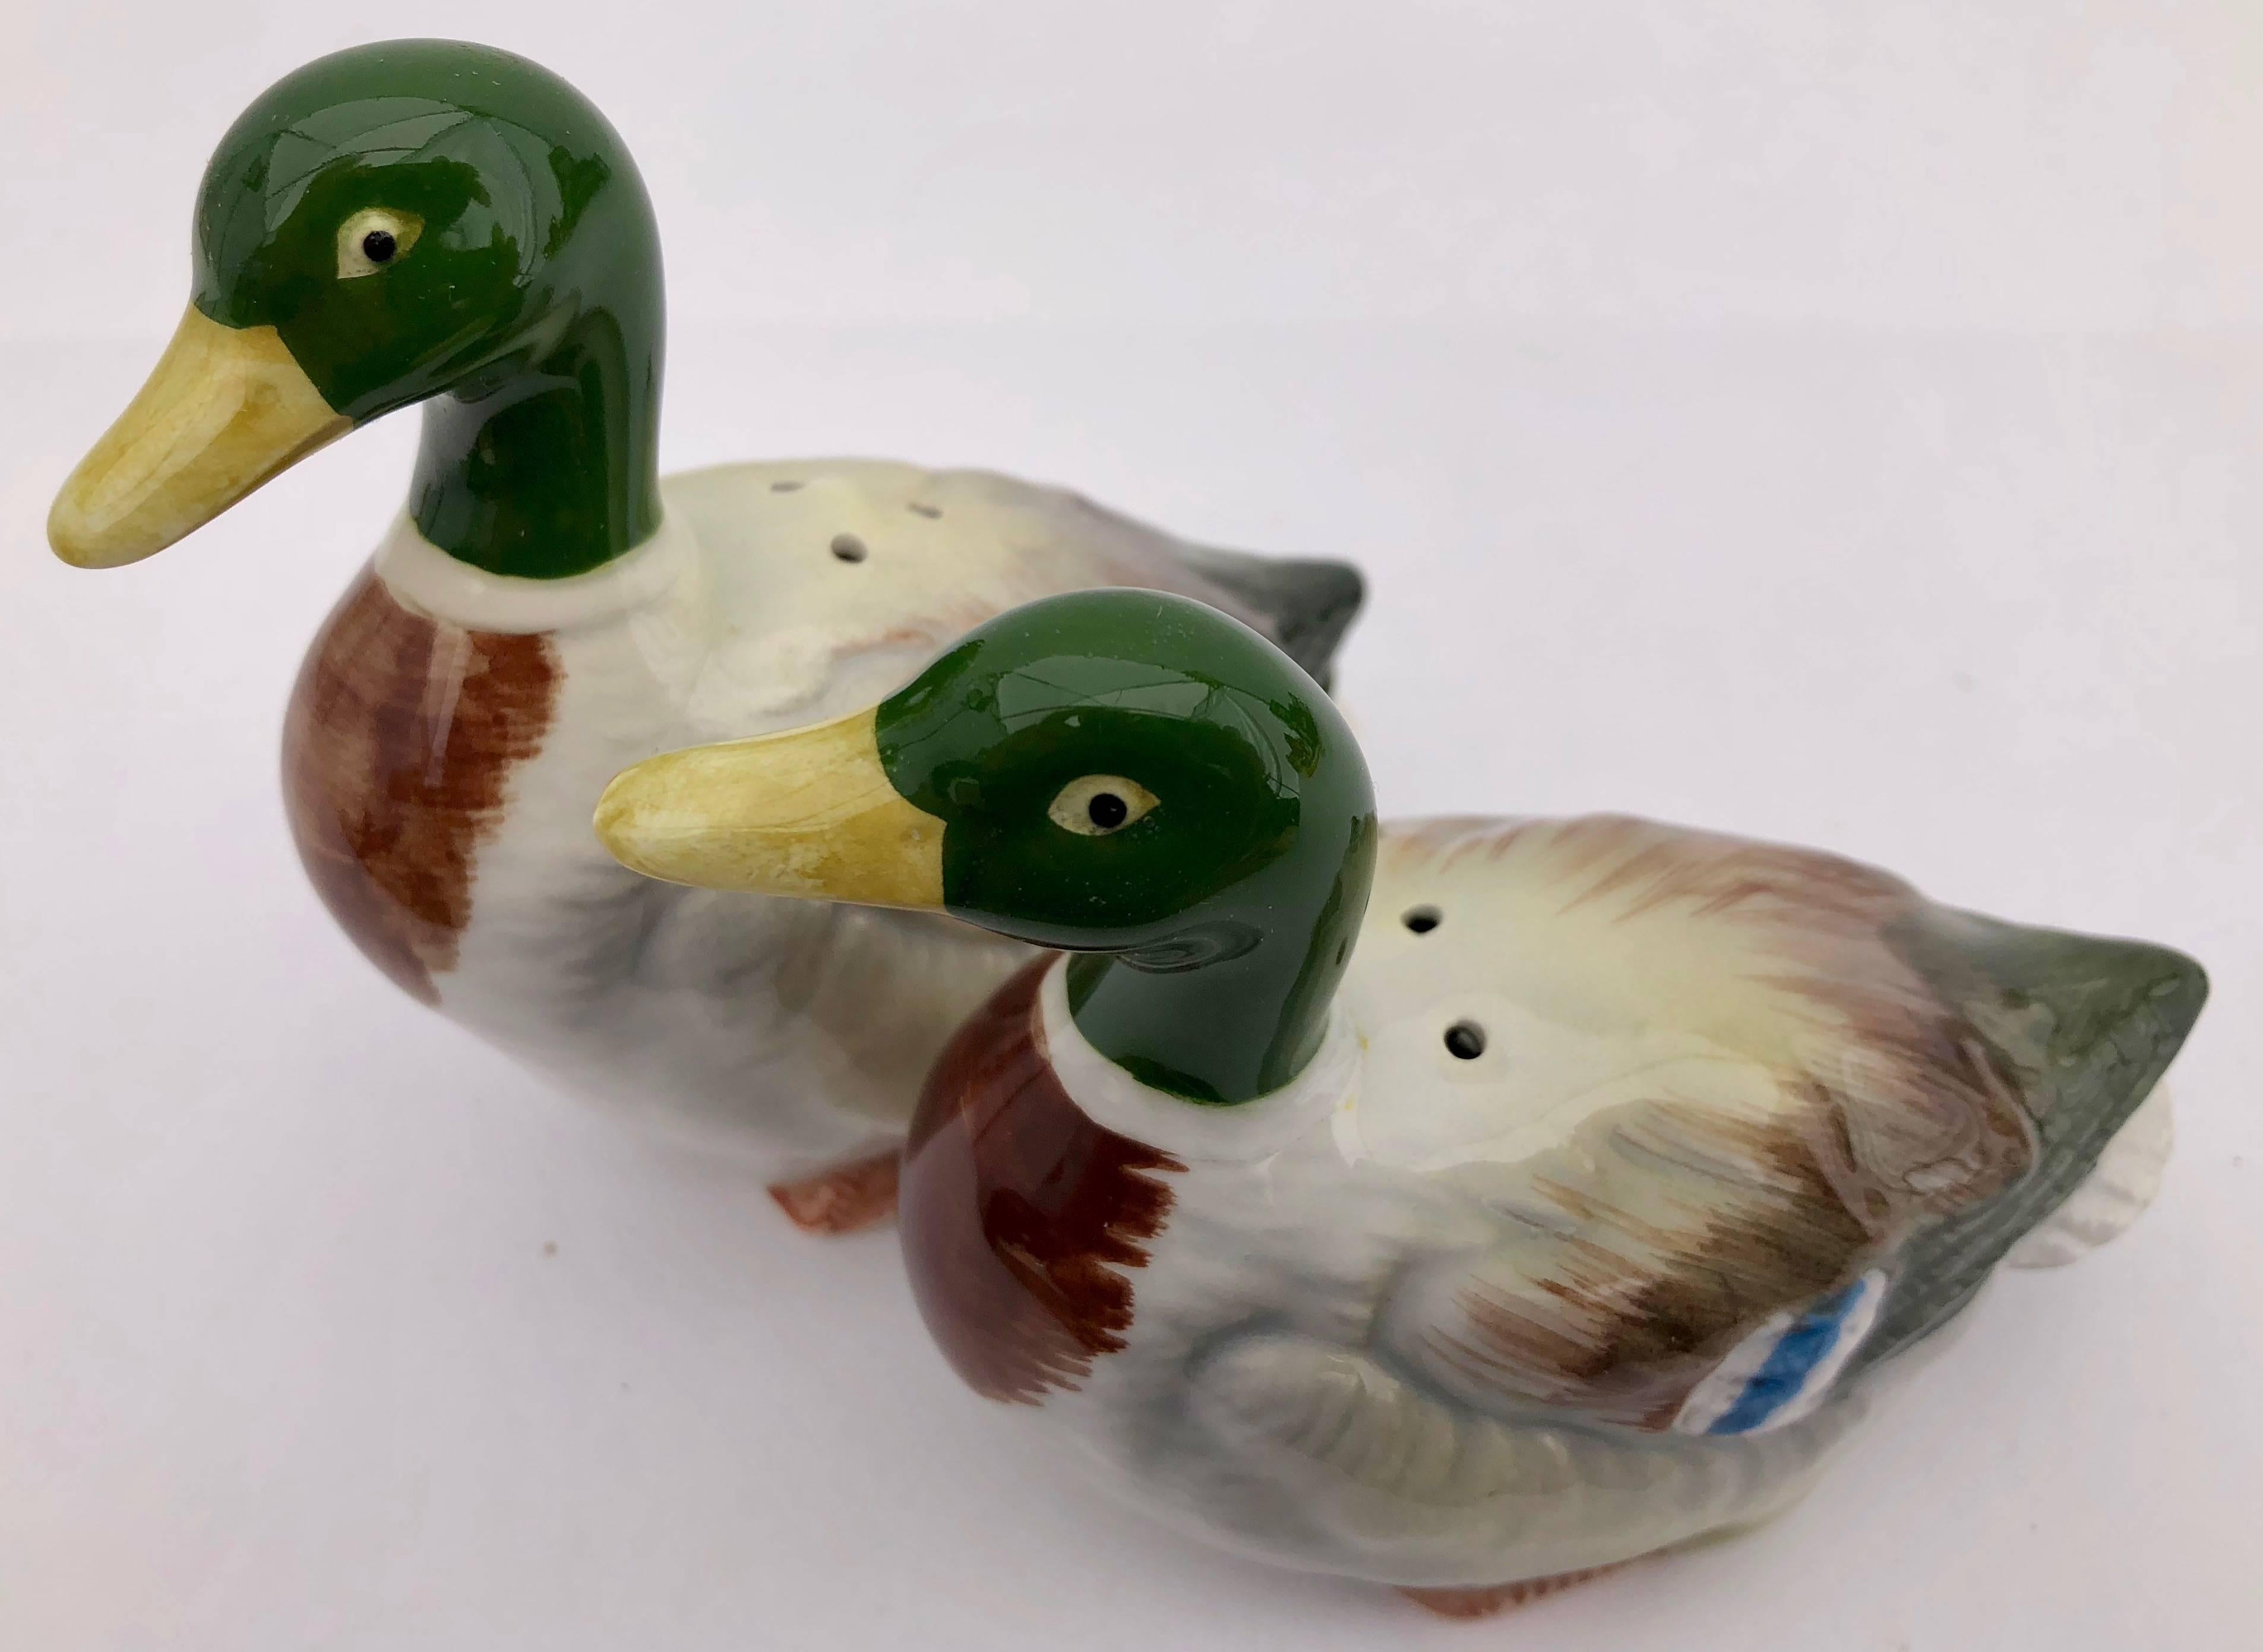 Japanese Mallard Duck Ceramic Salt and Pepper Shakers Handcrafted by Otagiri, Japan, Box For Sale